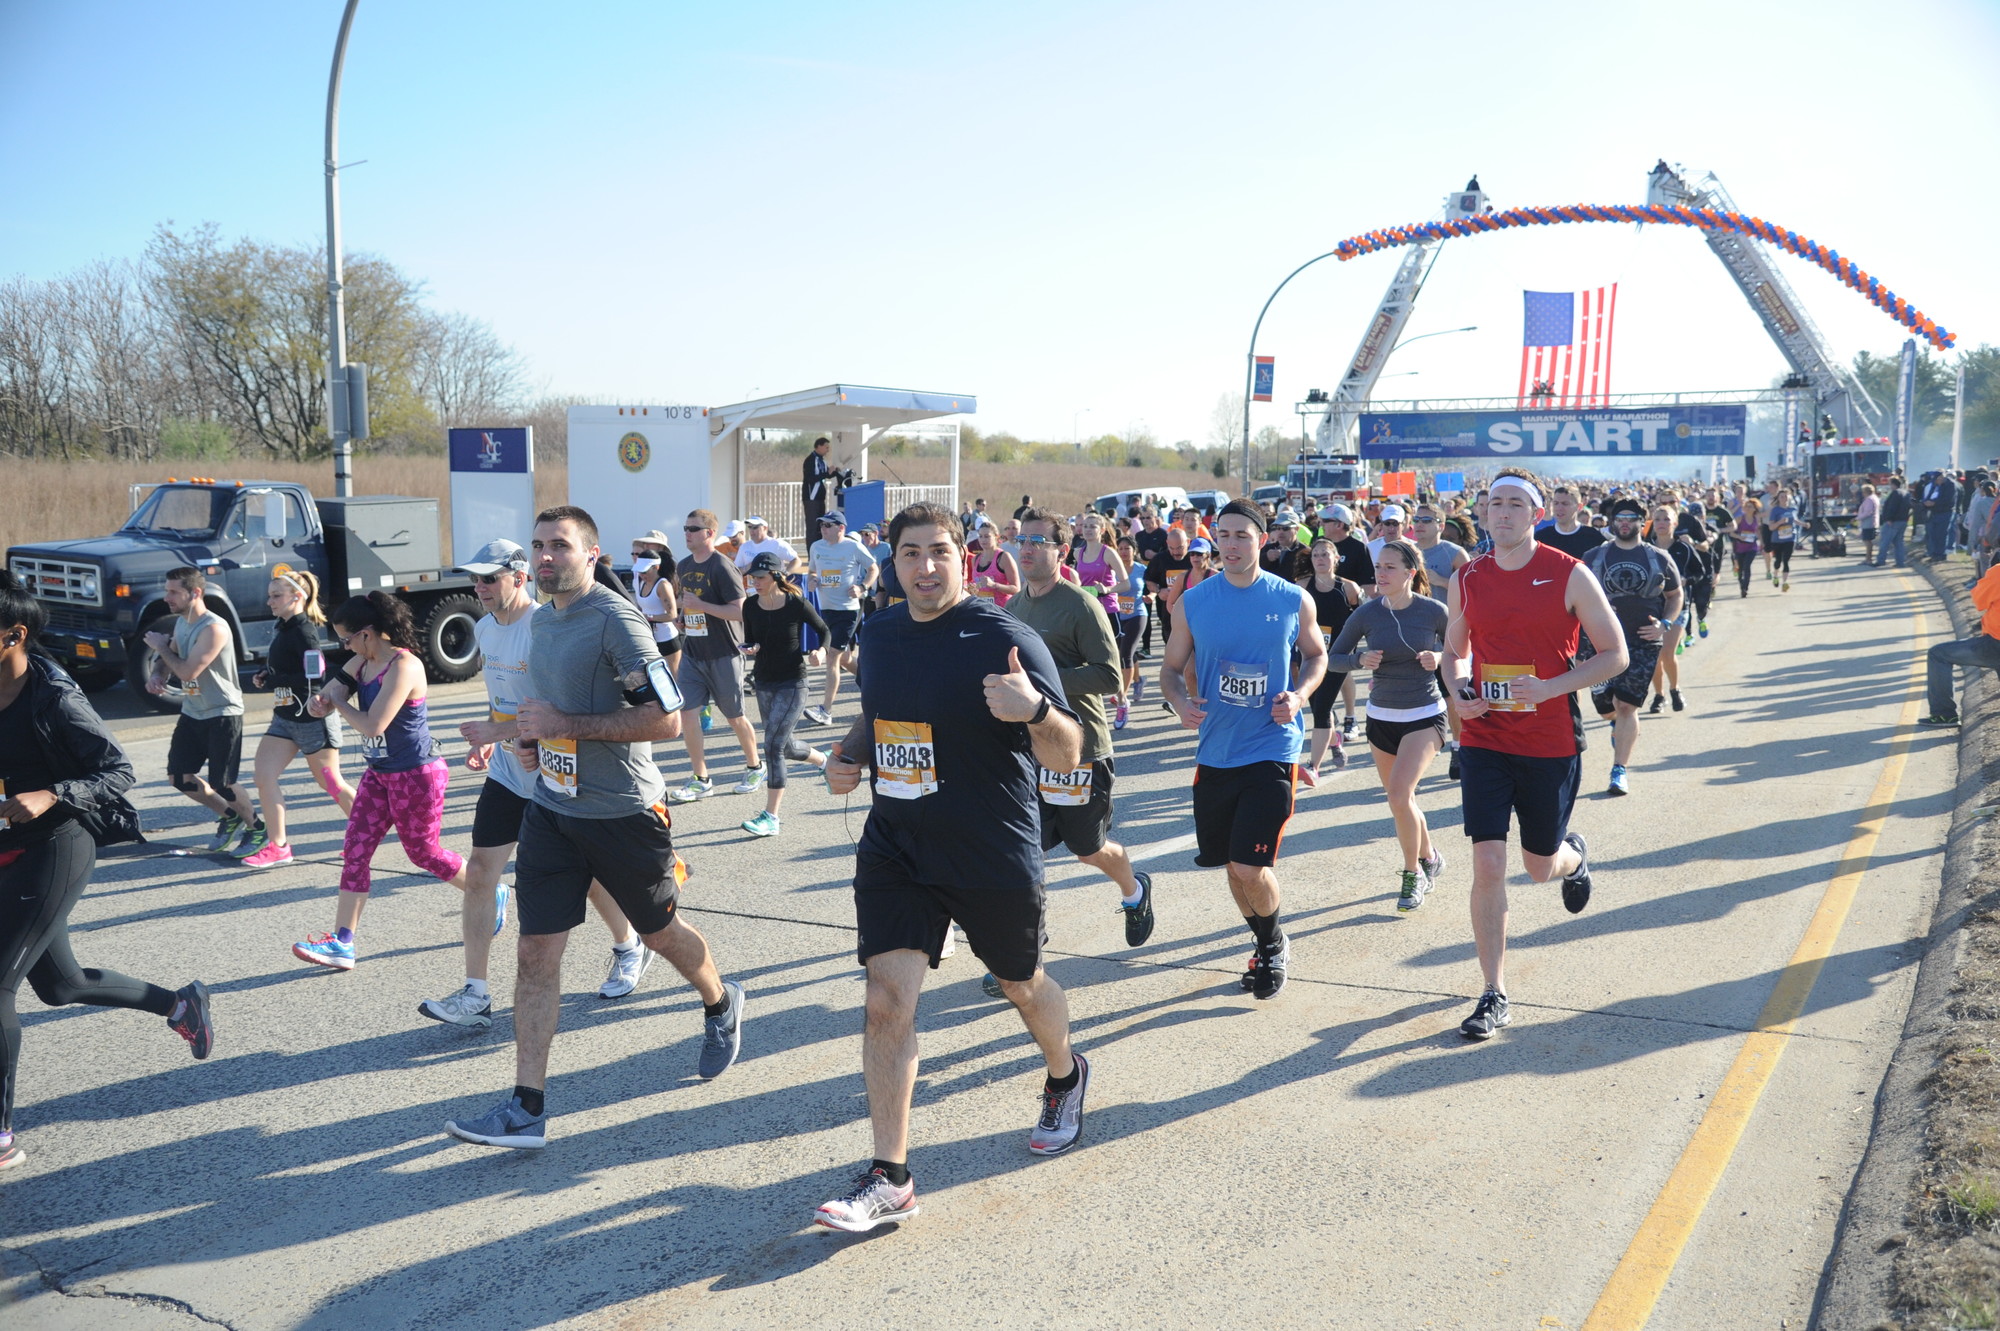 And they’re off! Runners began the marathon on Charles Lindbergh Boulevard in Uniondale last Sunday.